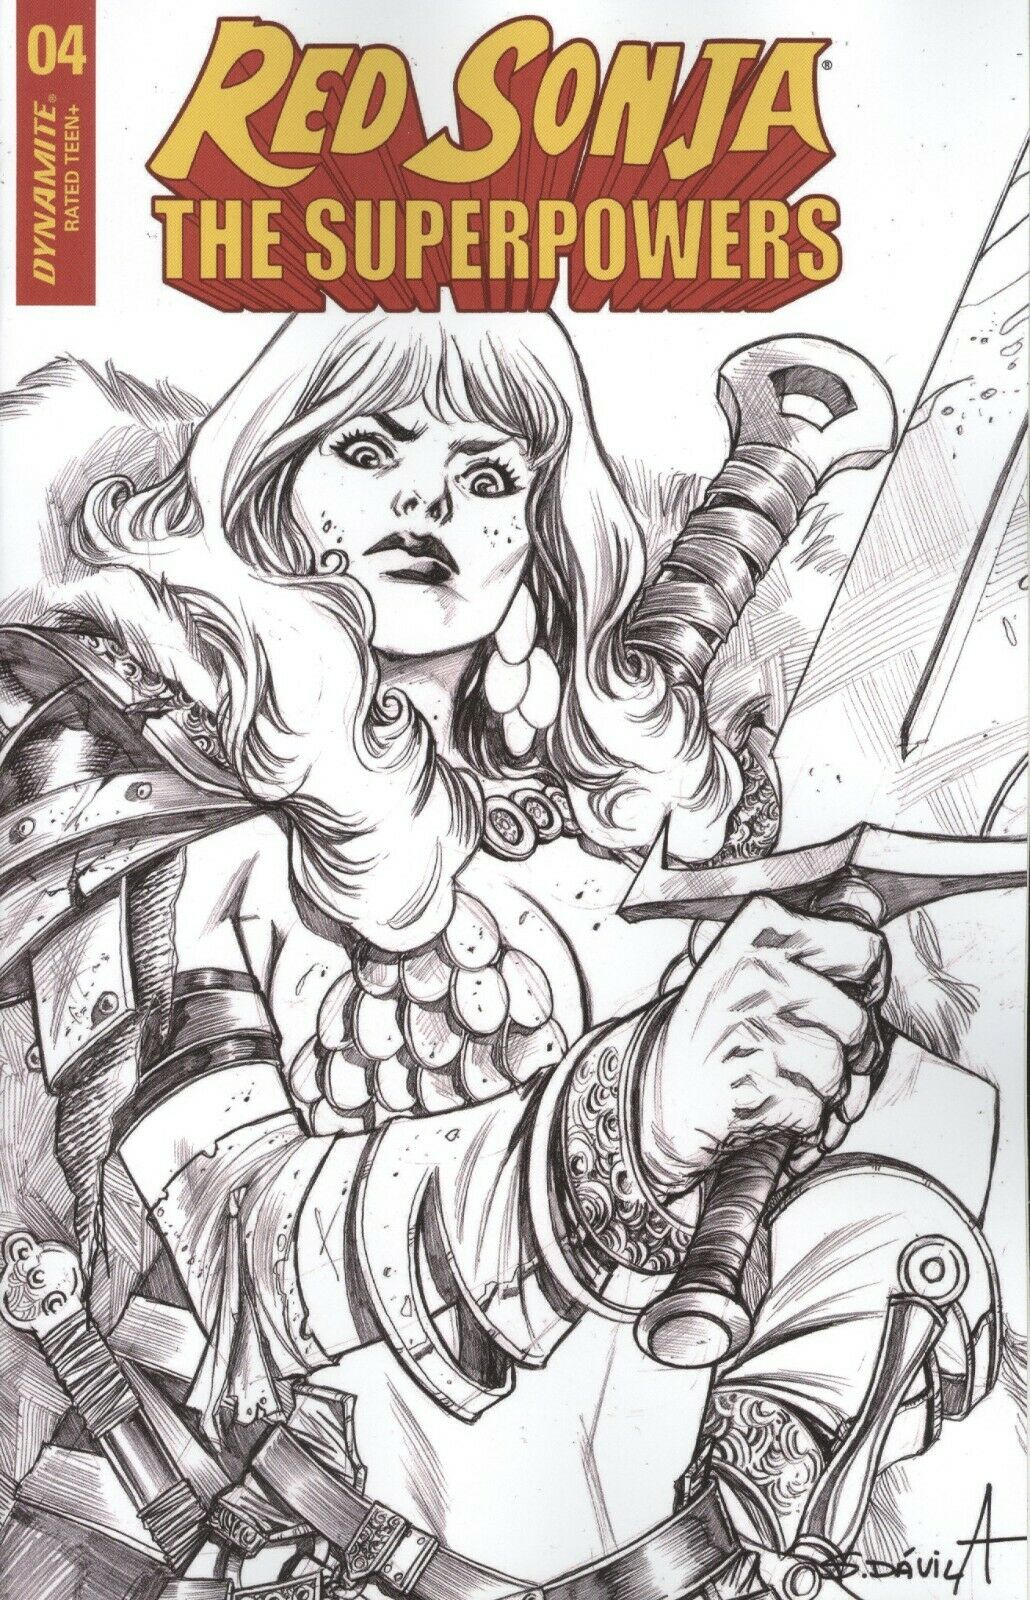 Red Sonja The Superpowers # 4 Davila 1 in 11 B&W Variant Cover !!  VF+